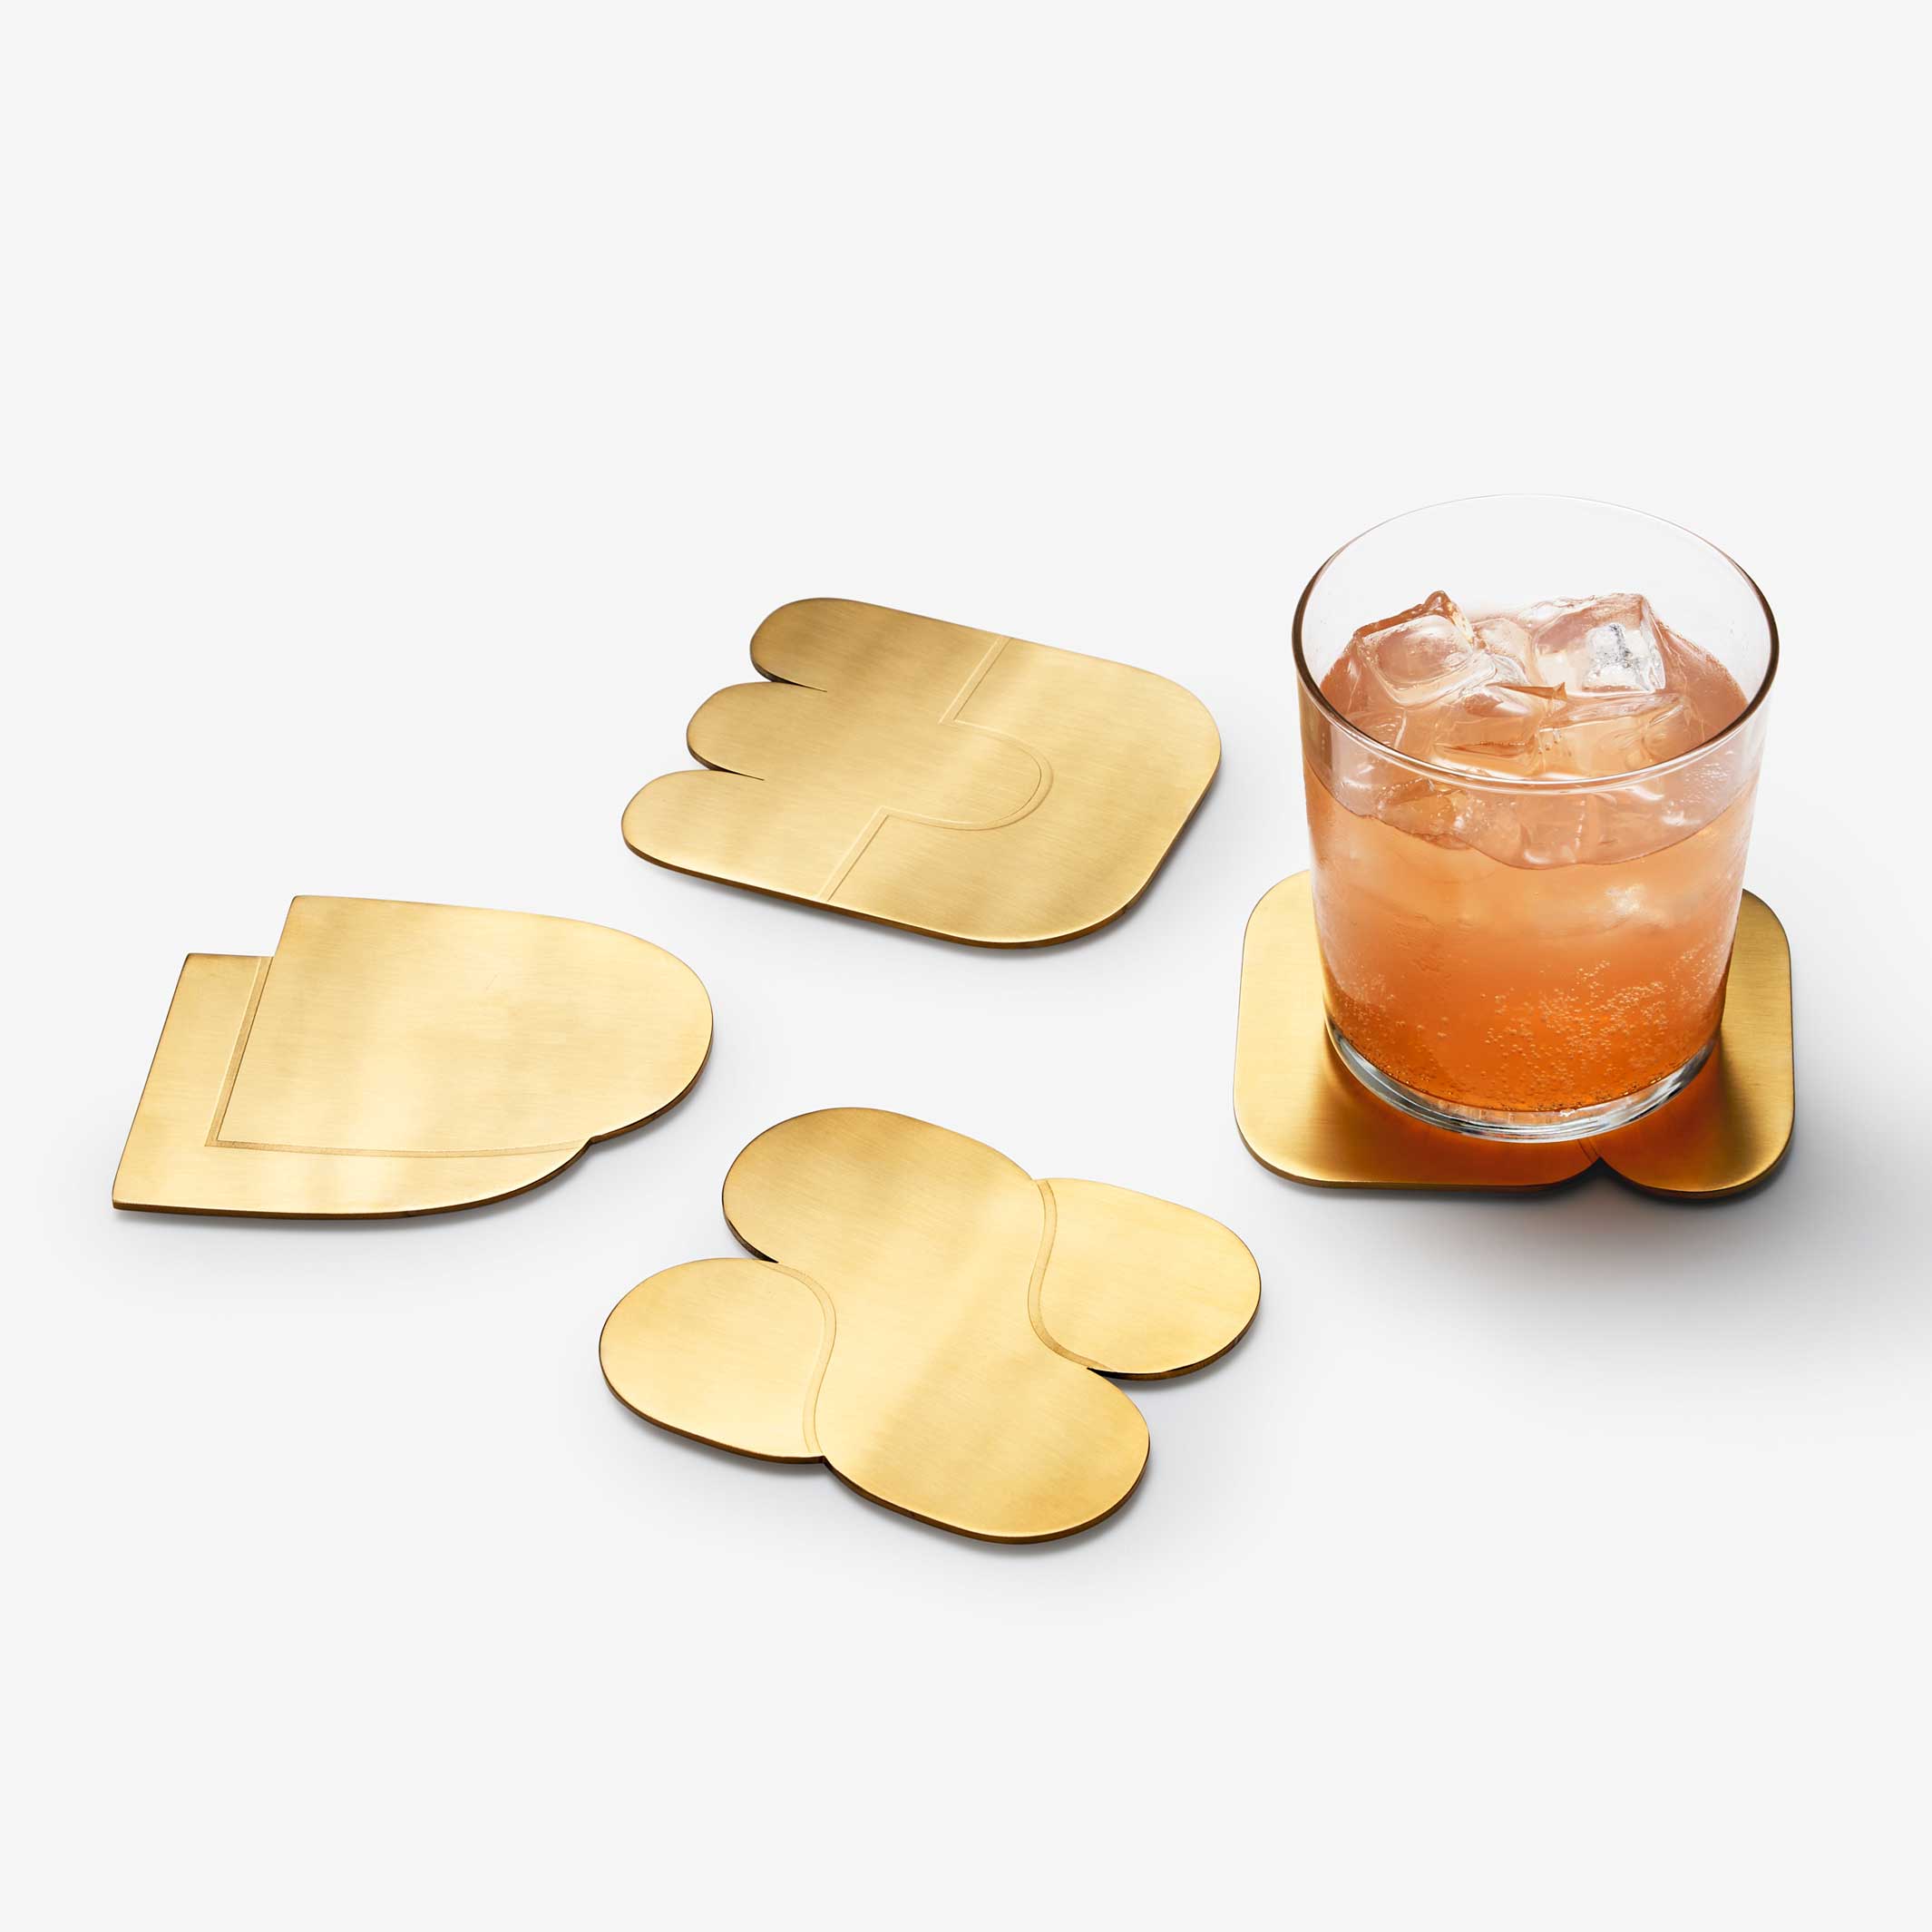 TOGETHER COASTERS | Set of 4 Coasters | Stainless steel brass-colored | Dan Covert | Areaware